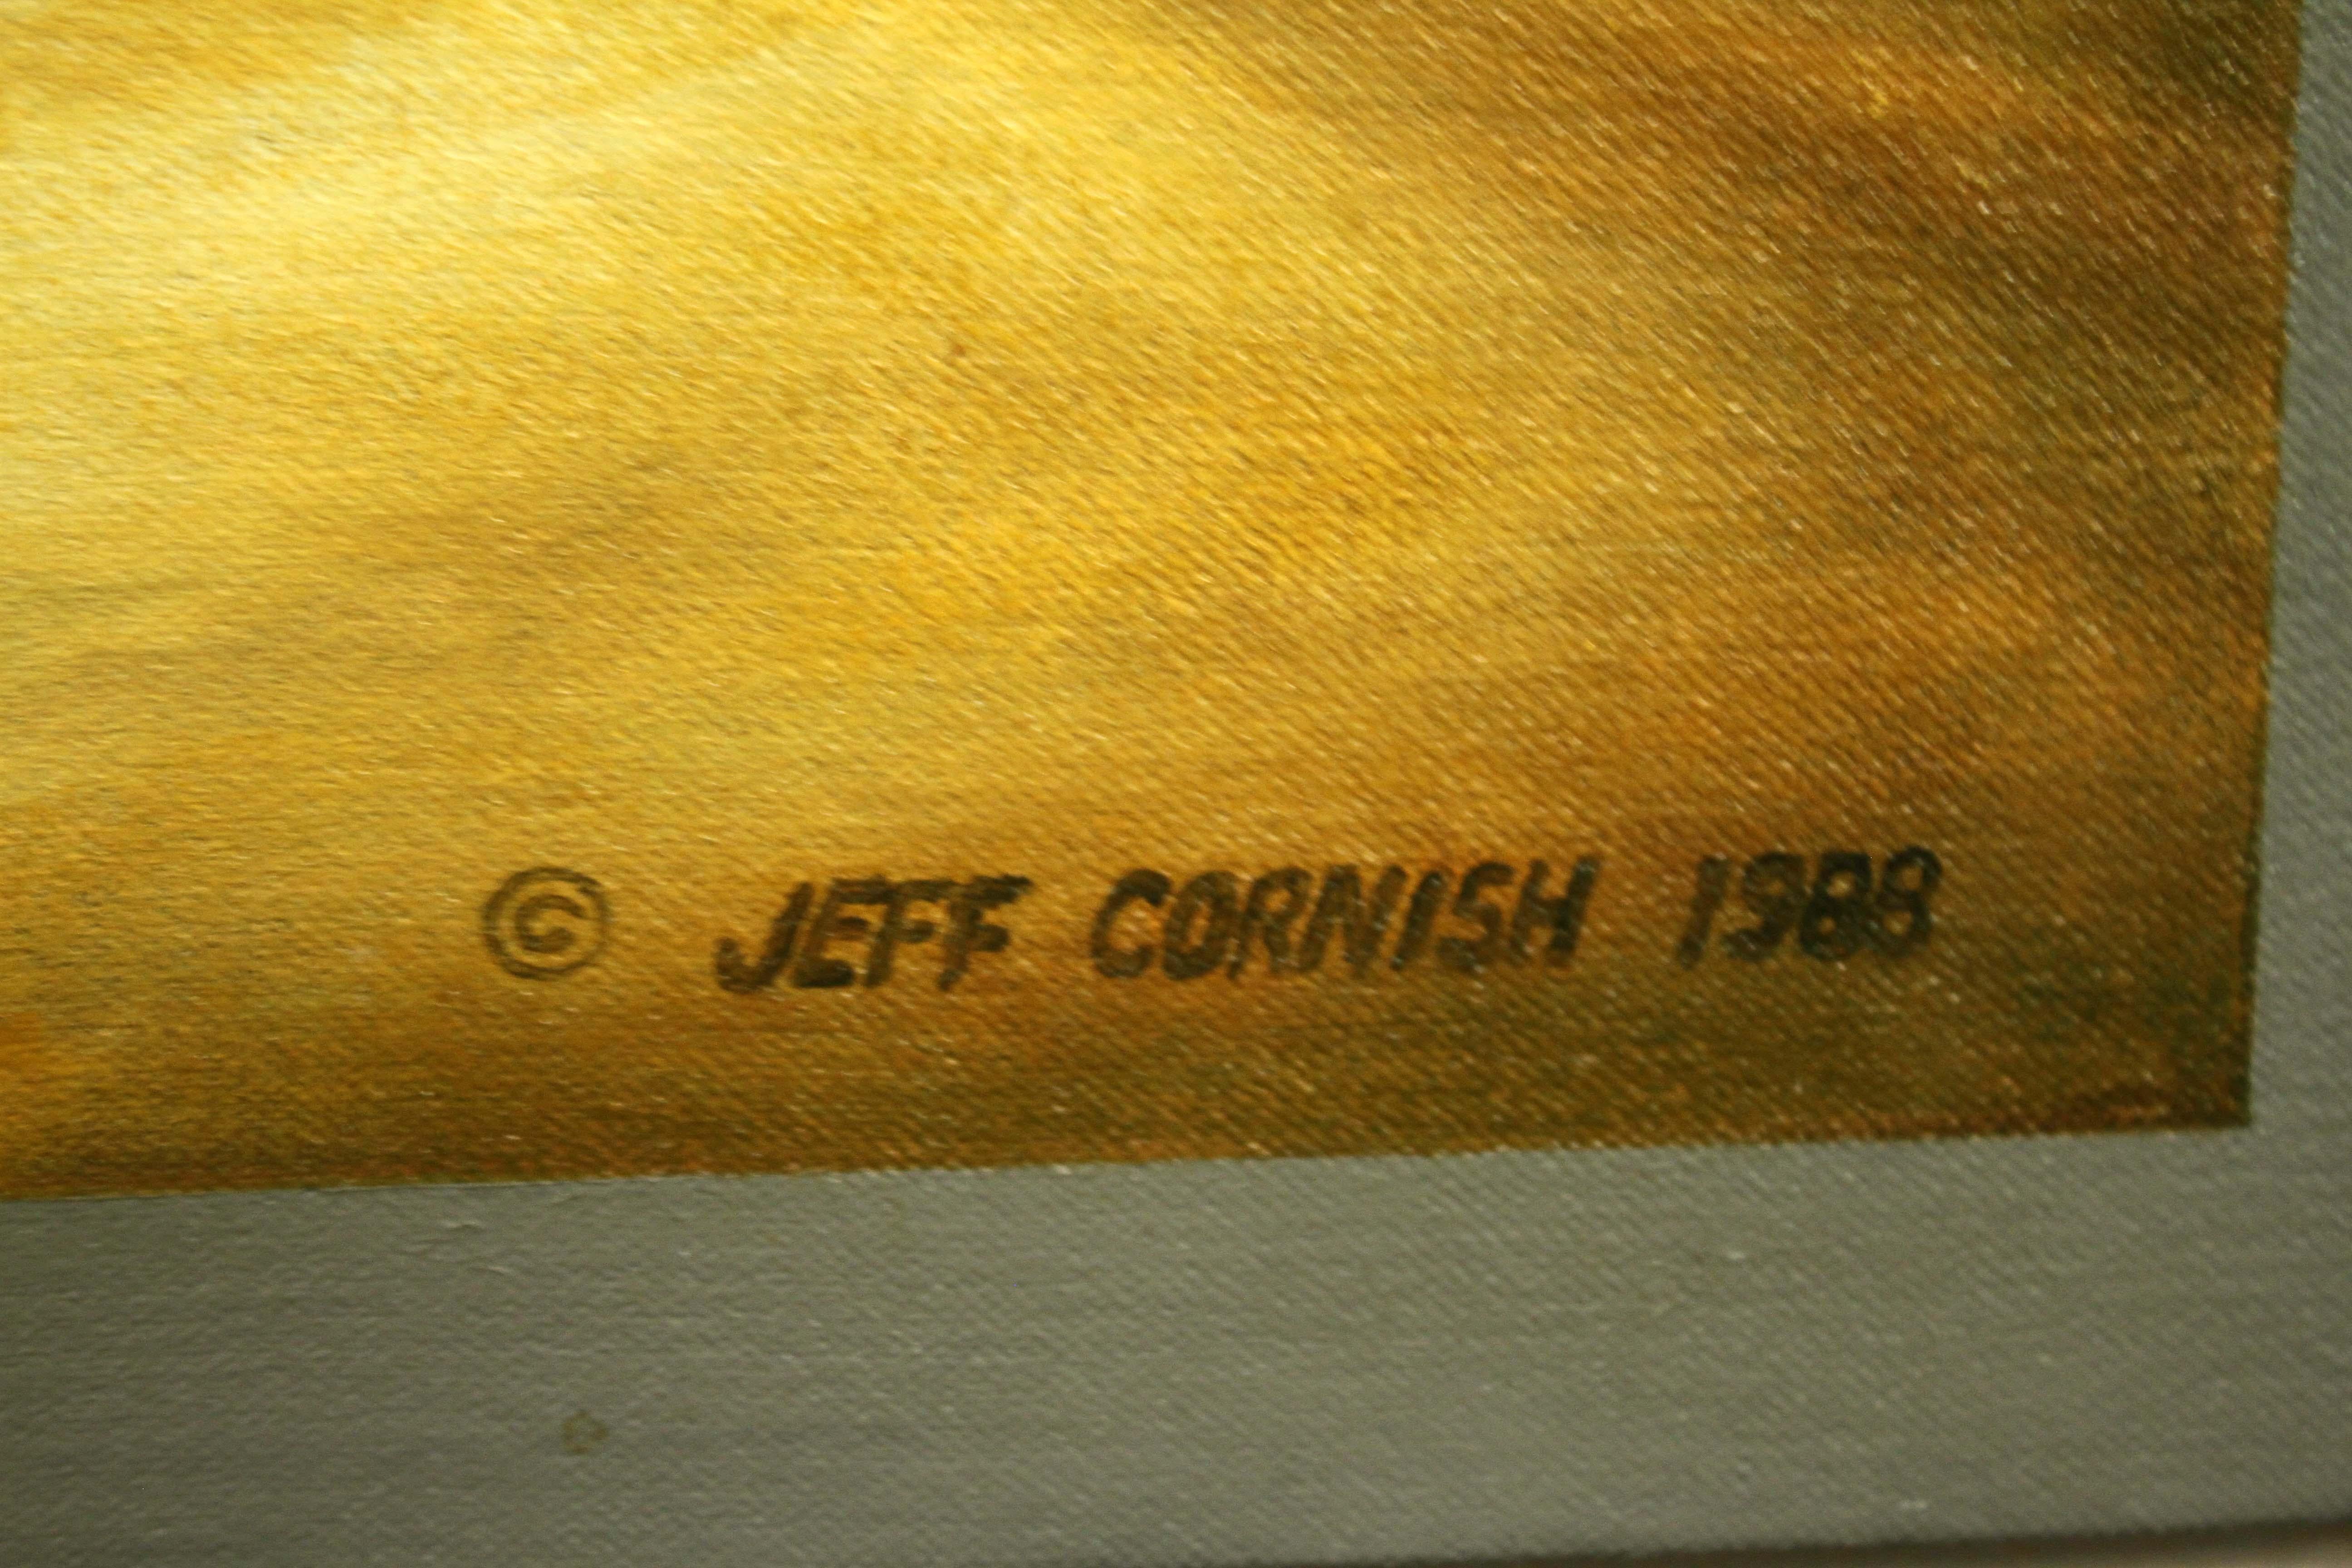 Jeff Cornish Body Armour Signed 1988 Photorealistic Acrylic Painting on Canvas For Sale 3